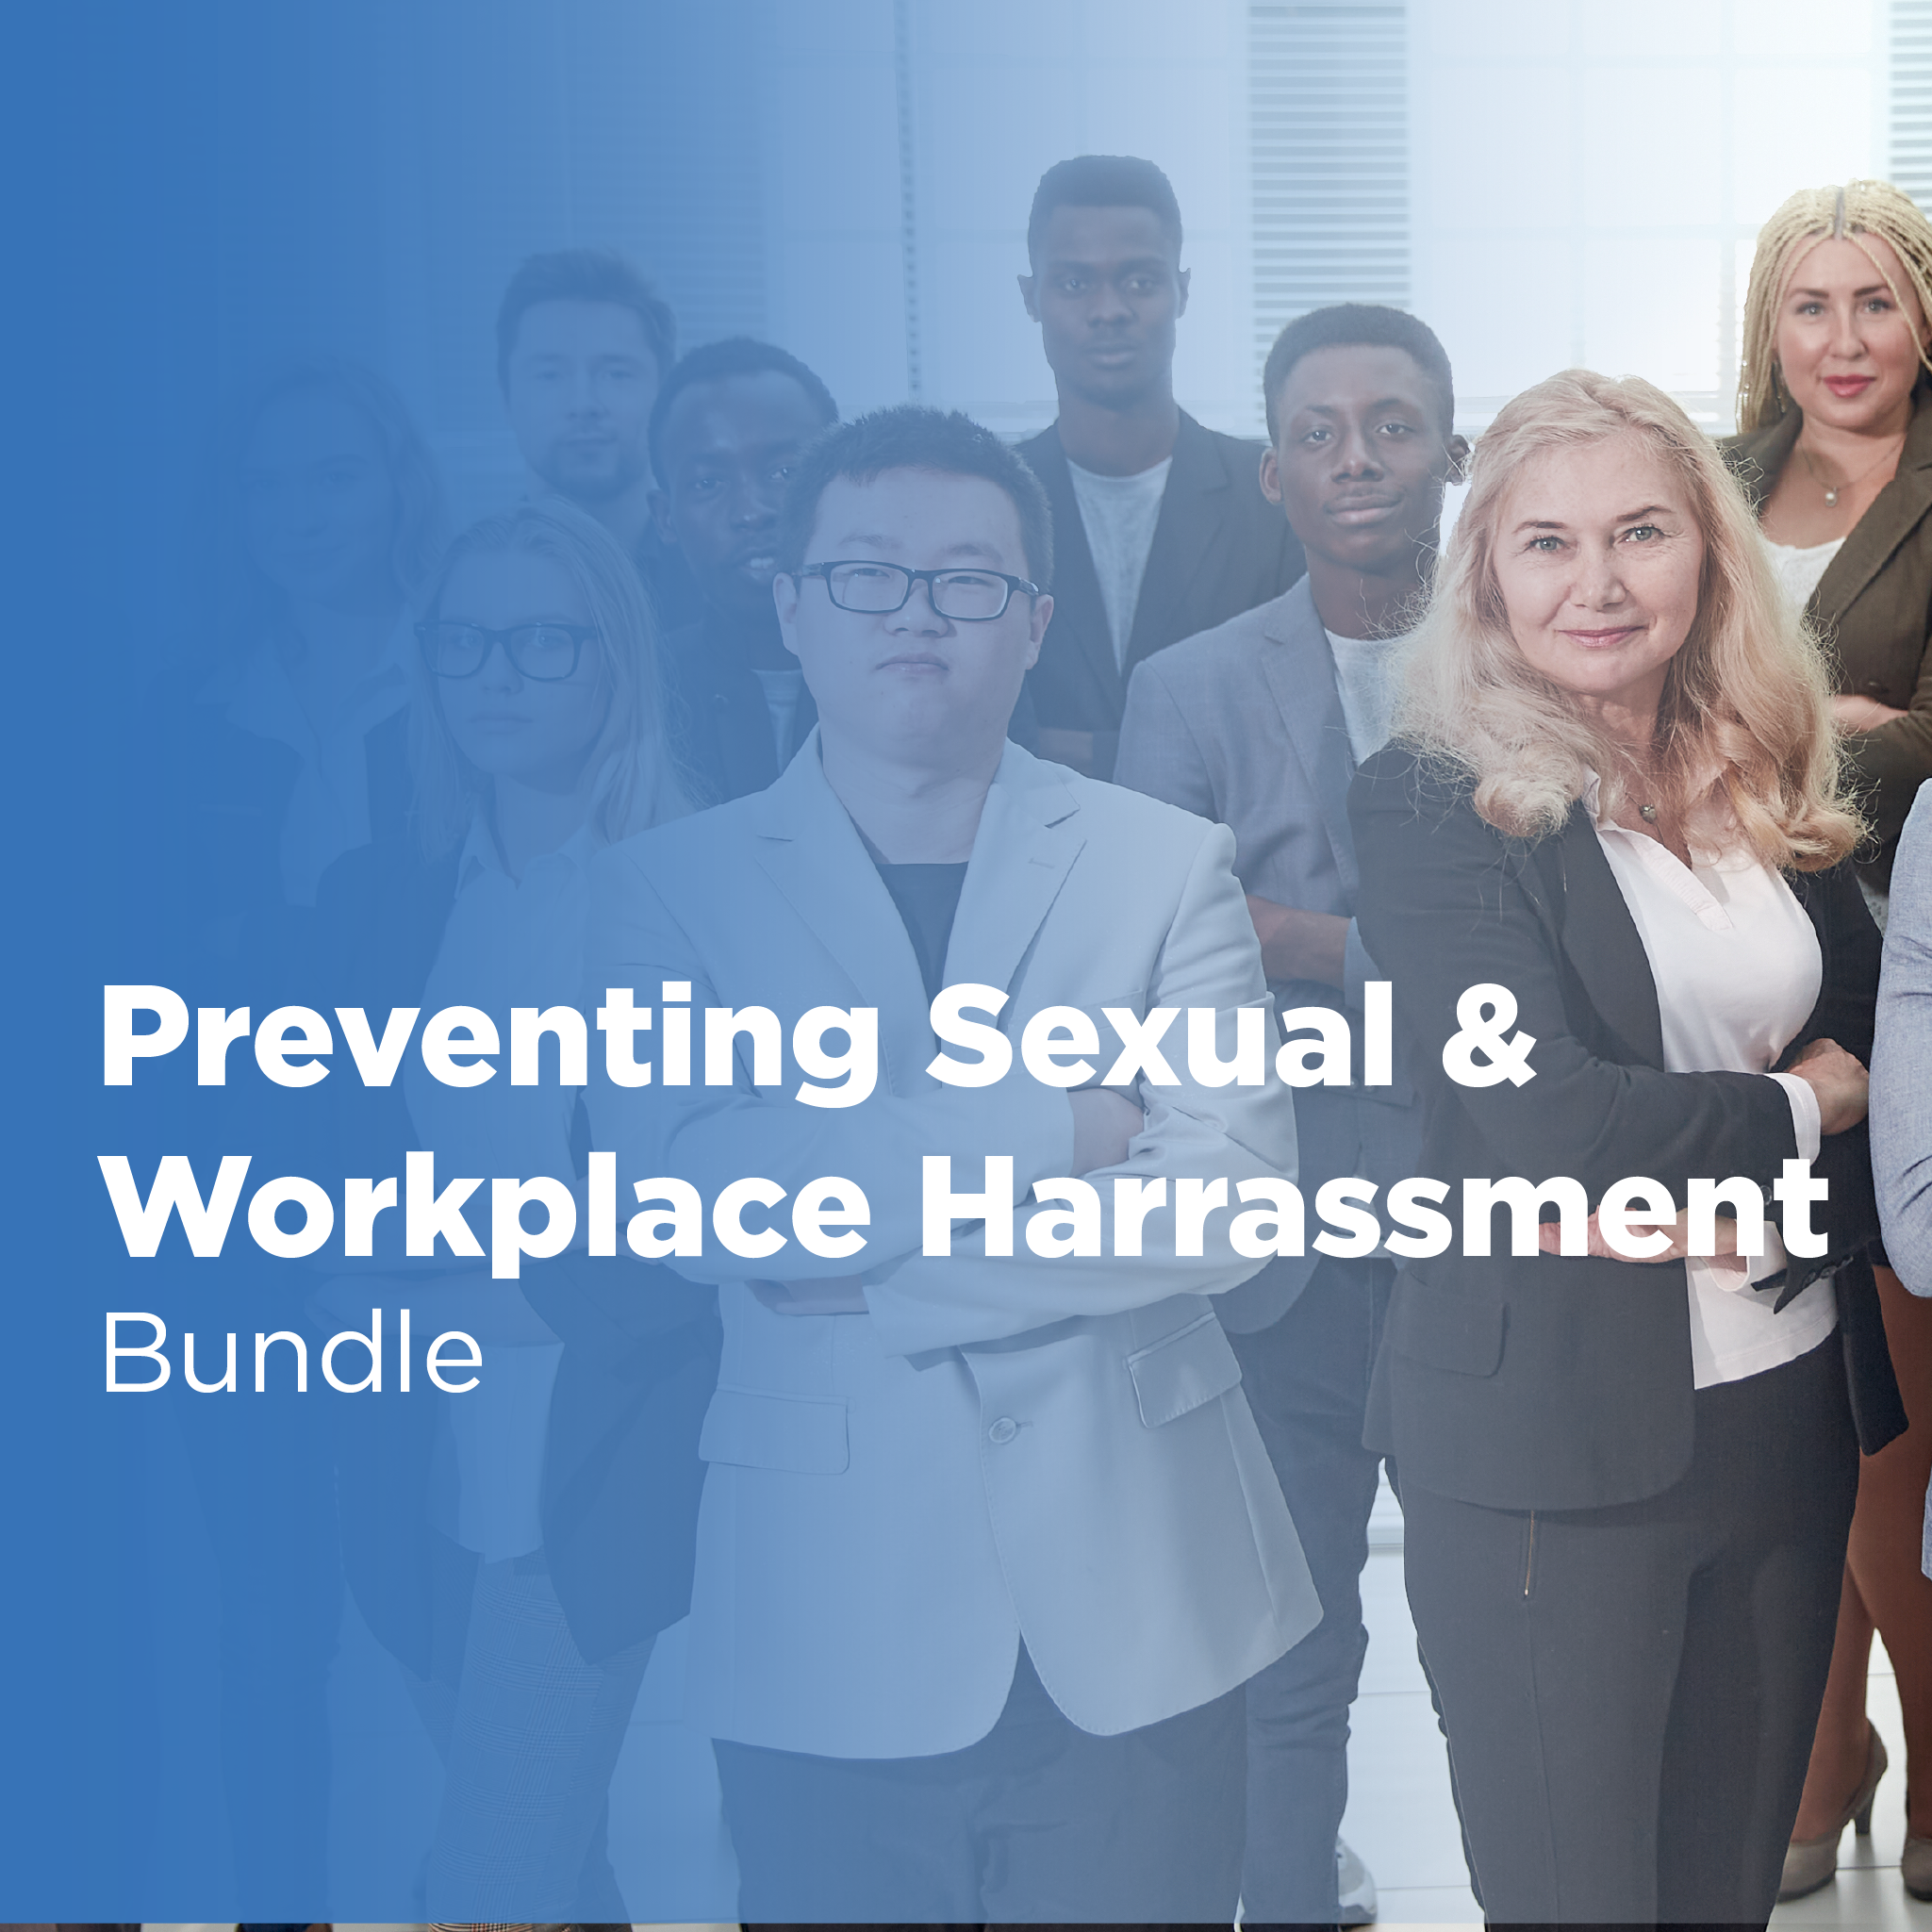 Preventing Sexual & Workplace Harassment Bundle